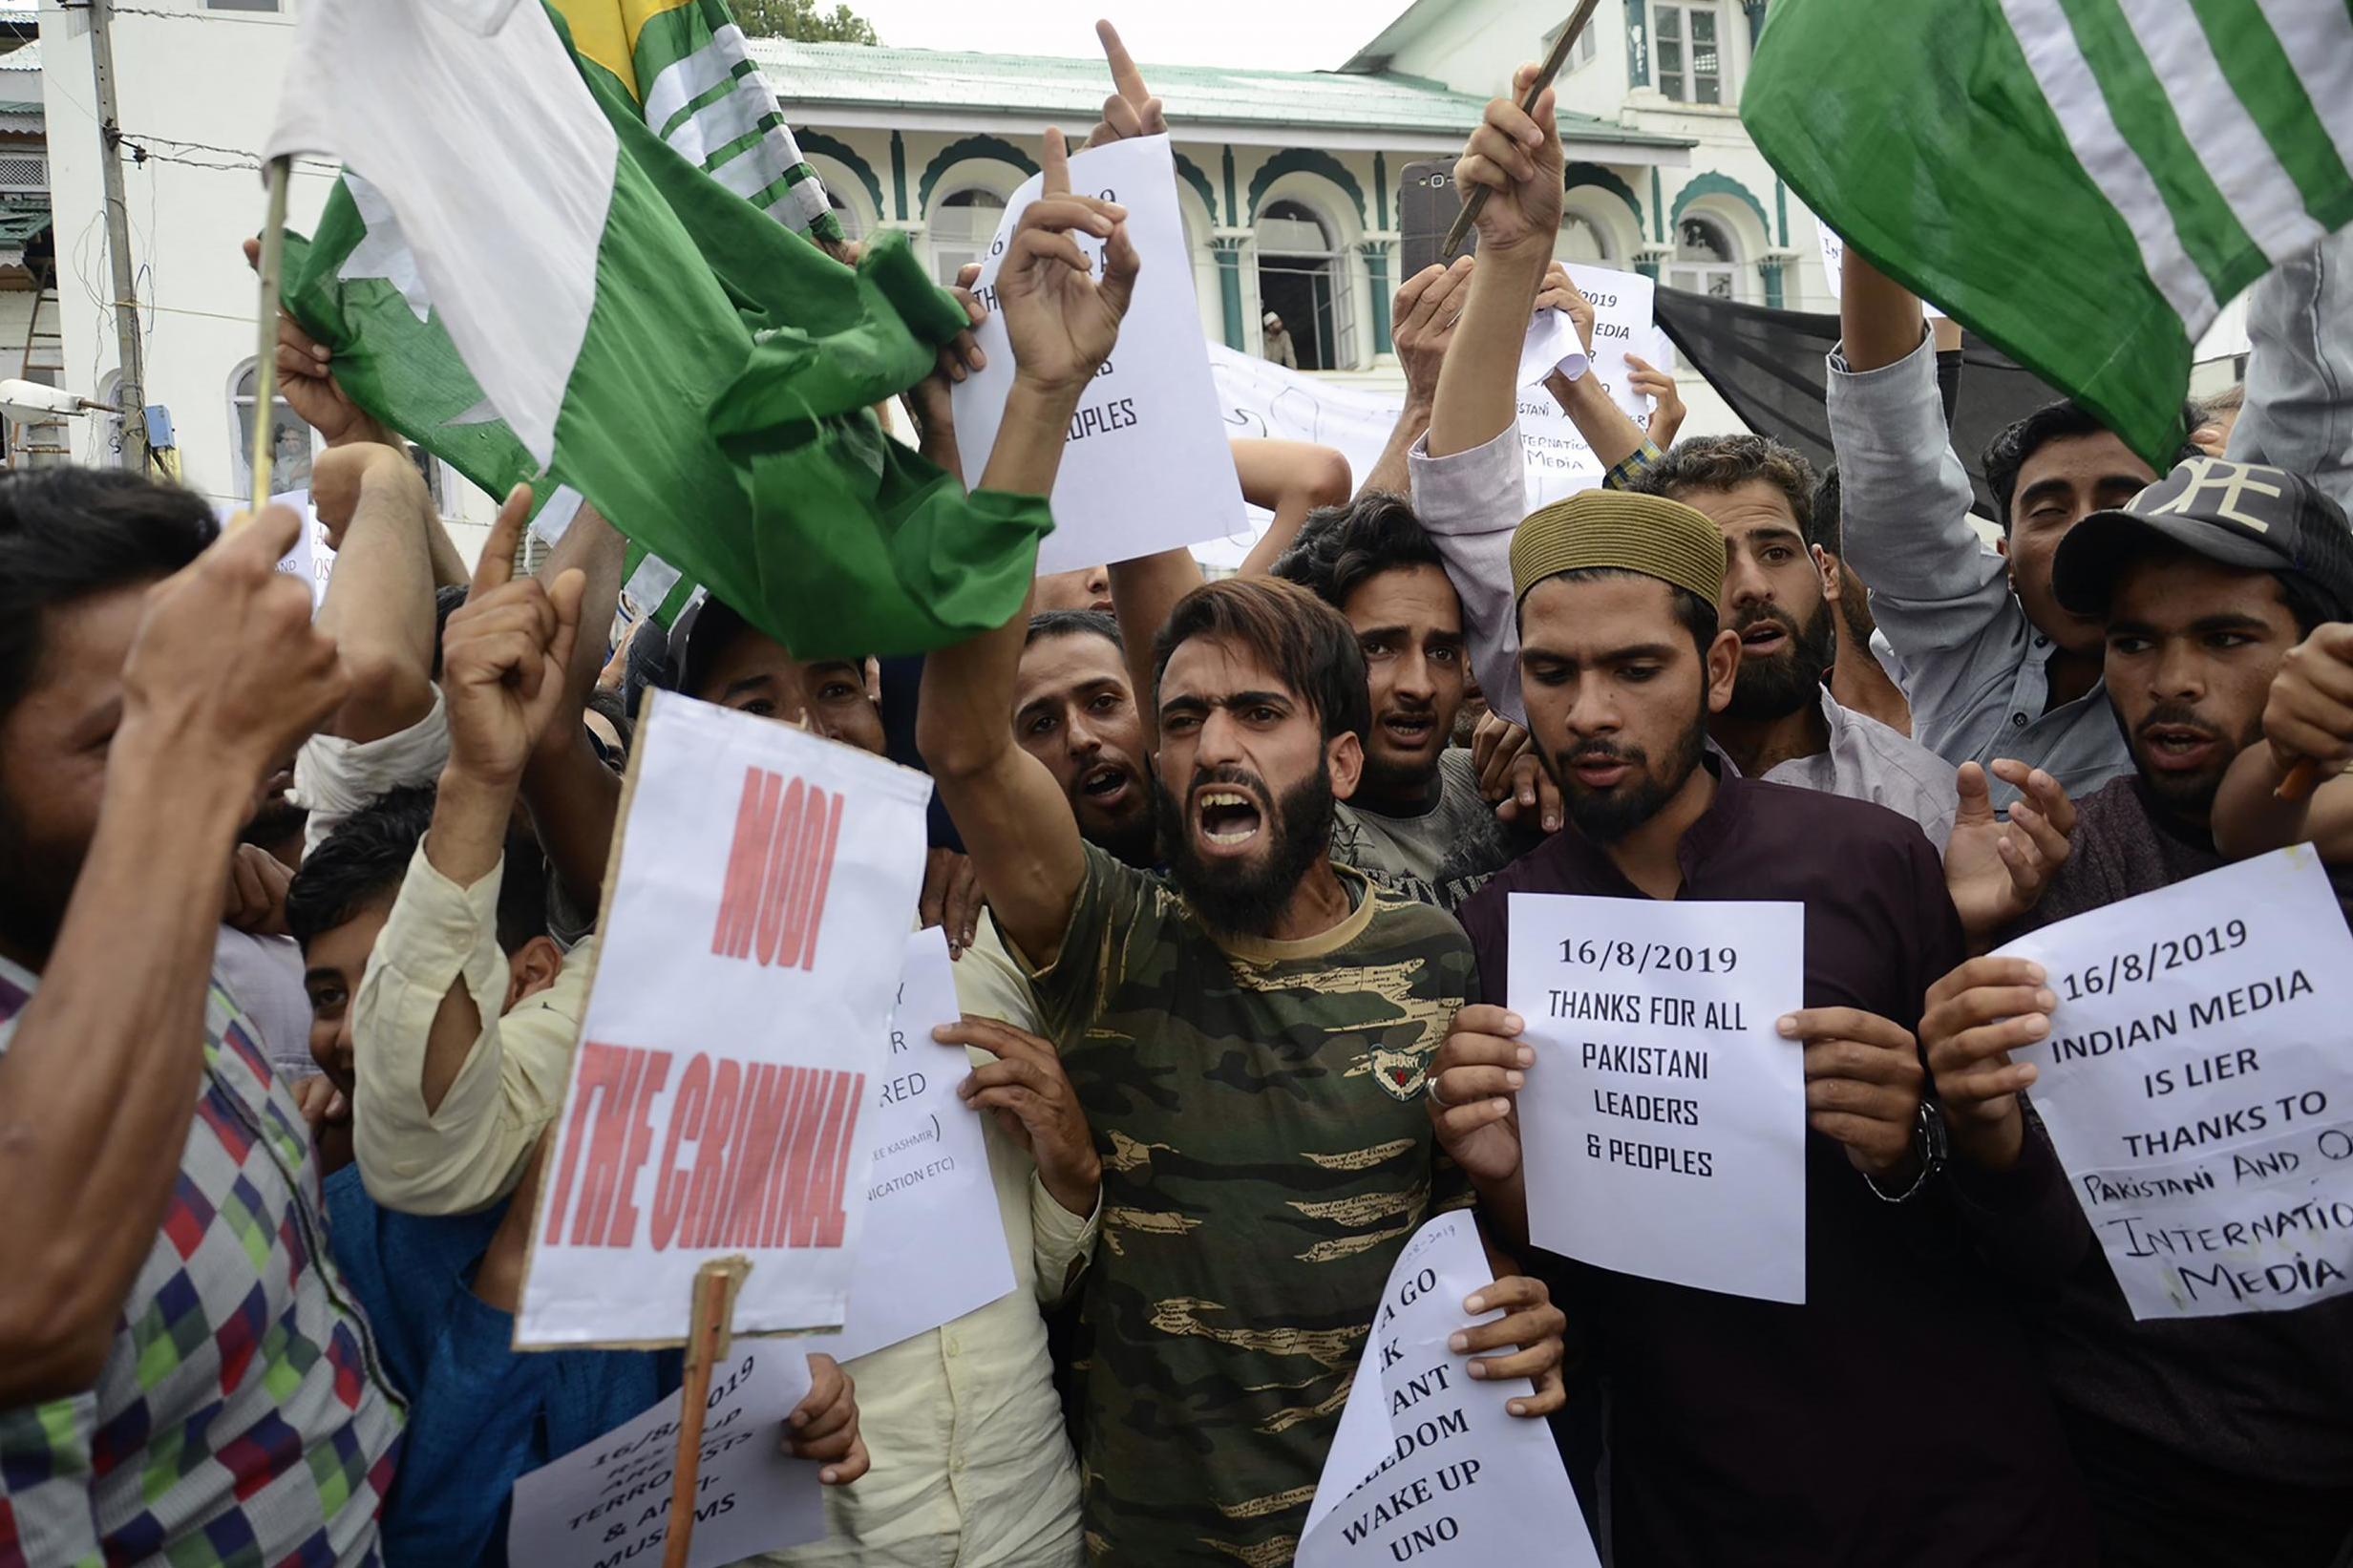 Protesters at a rally against the Indian government's move to strip Jammu and Kashmir of its autonomy (AFP/Getty)